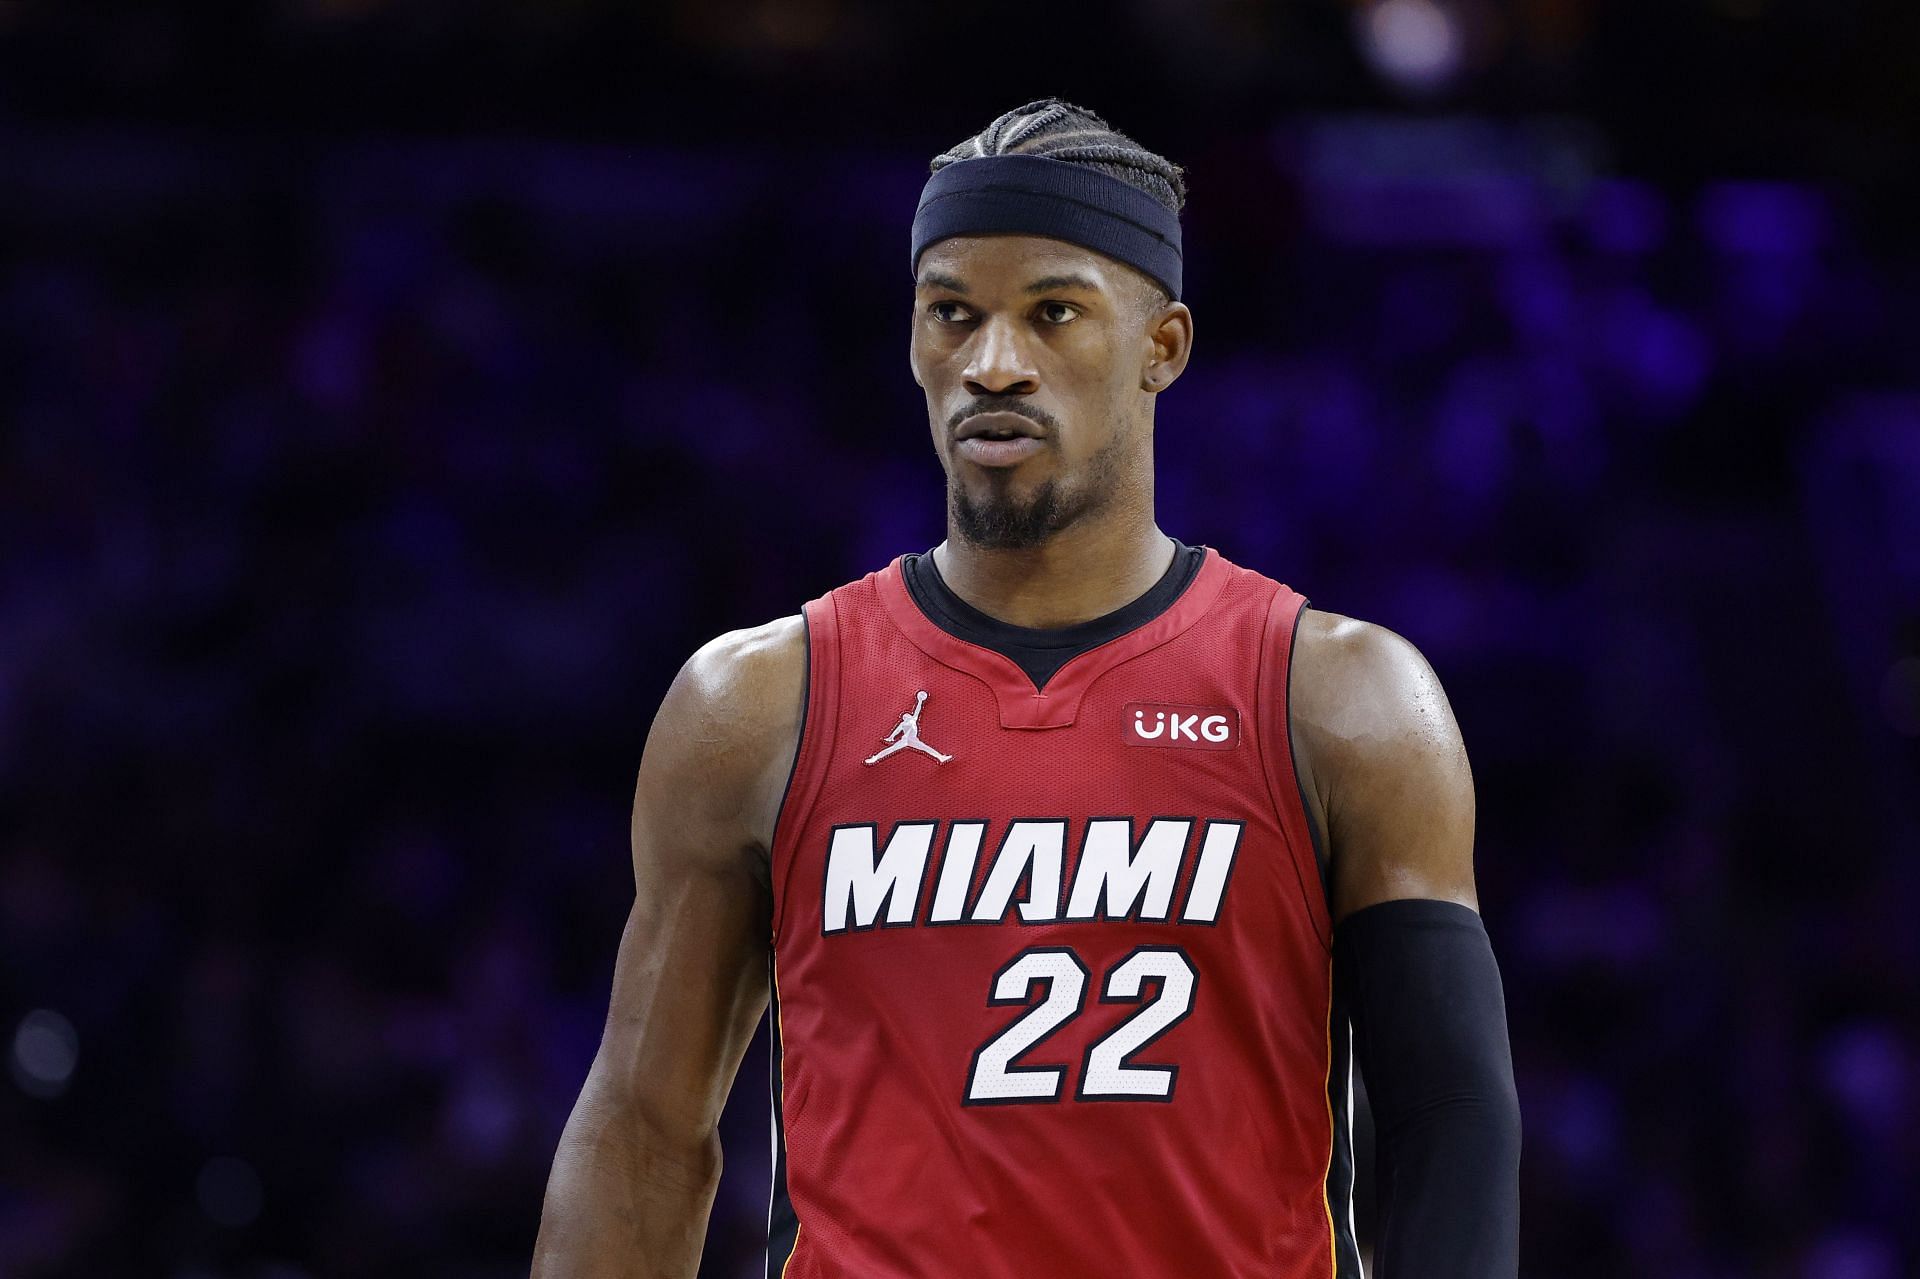 Jimmy Butler will be key if the Heat are to get past the Celtics